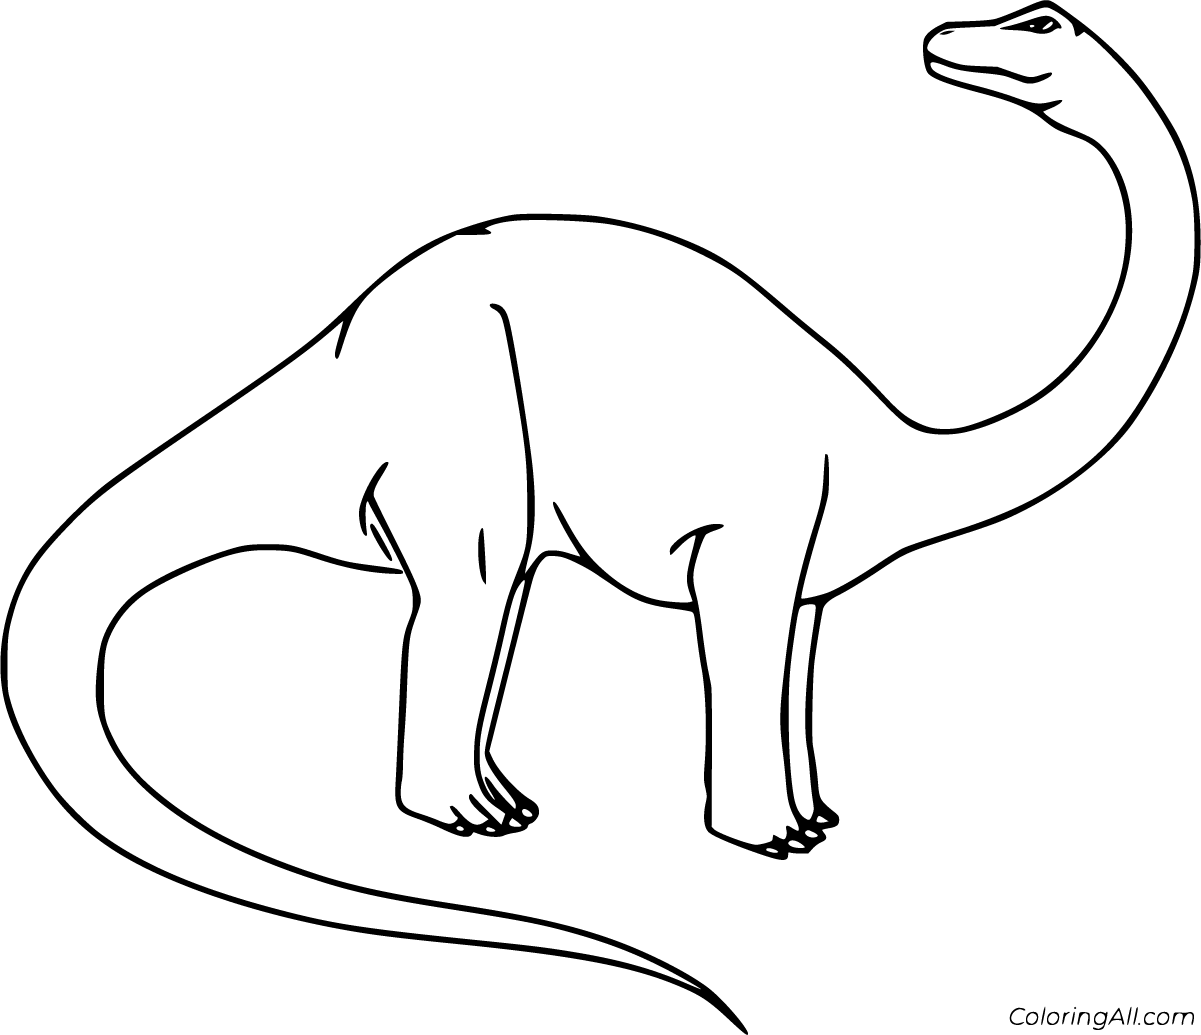 Download Brontosaurus Coloring Pages - ColoringAll